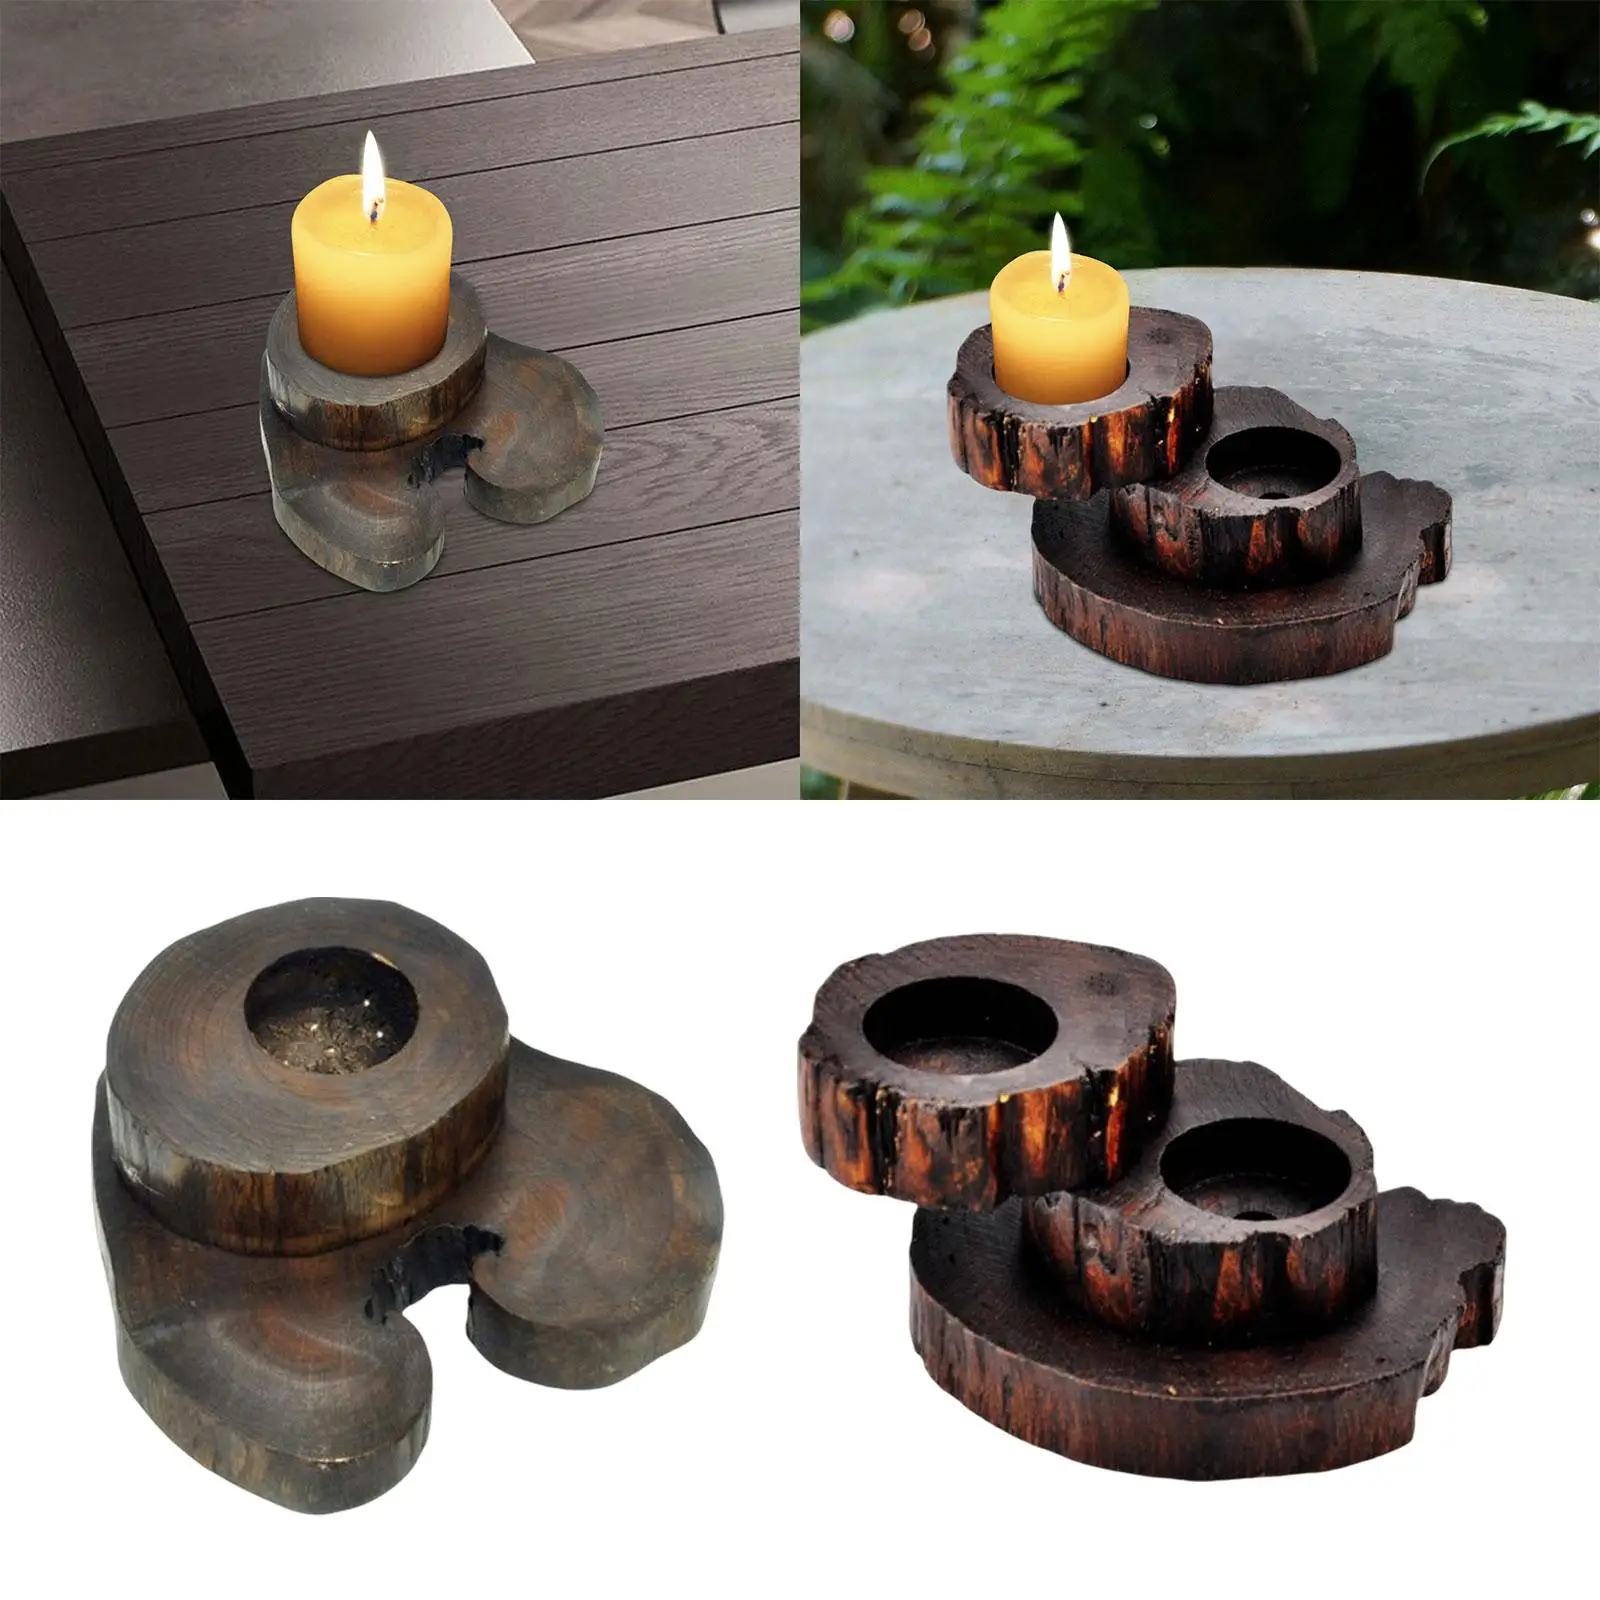 Twist Tealight Candle Holder Cupcake Plate Wood Display Holder Rotating Sushi Serving Tray for Wedding Hotel Home Rustic Party